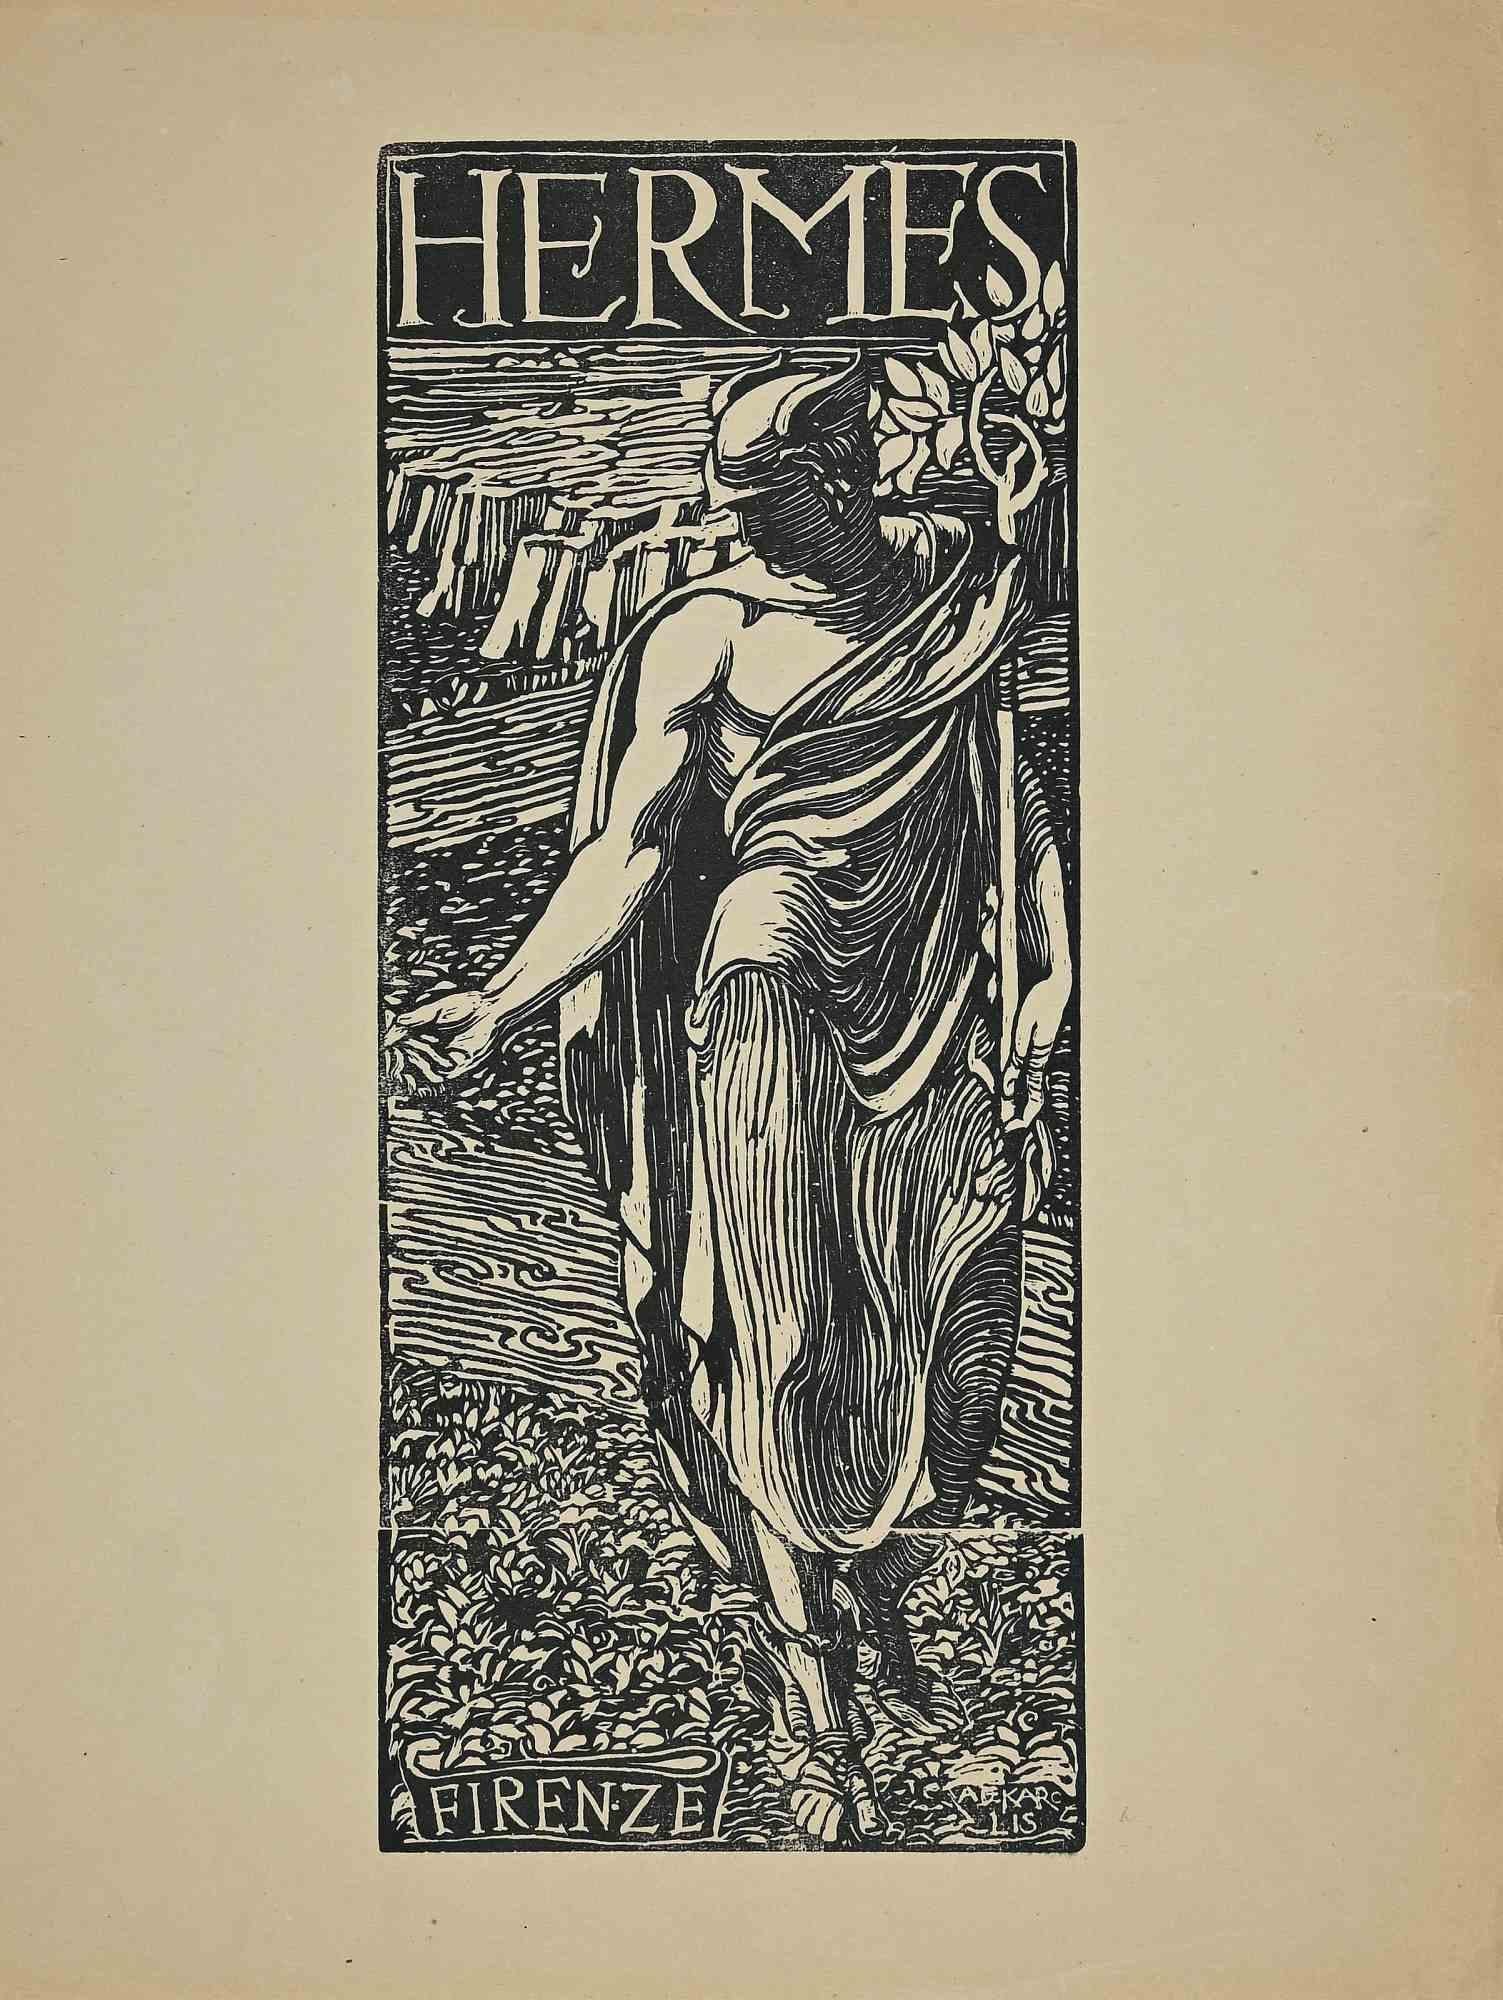 Unknown Figurative Print - Hermes God - Original Woodcut - Early 20th Century